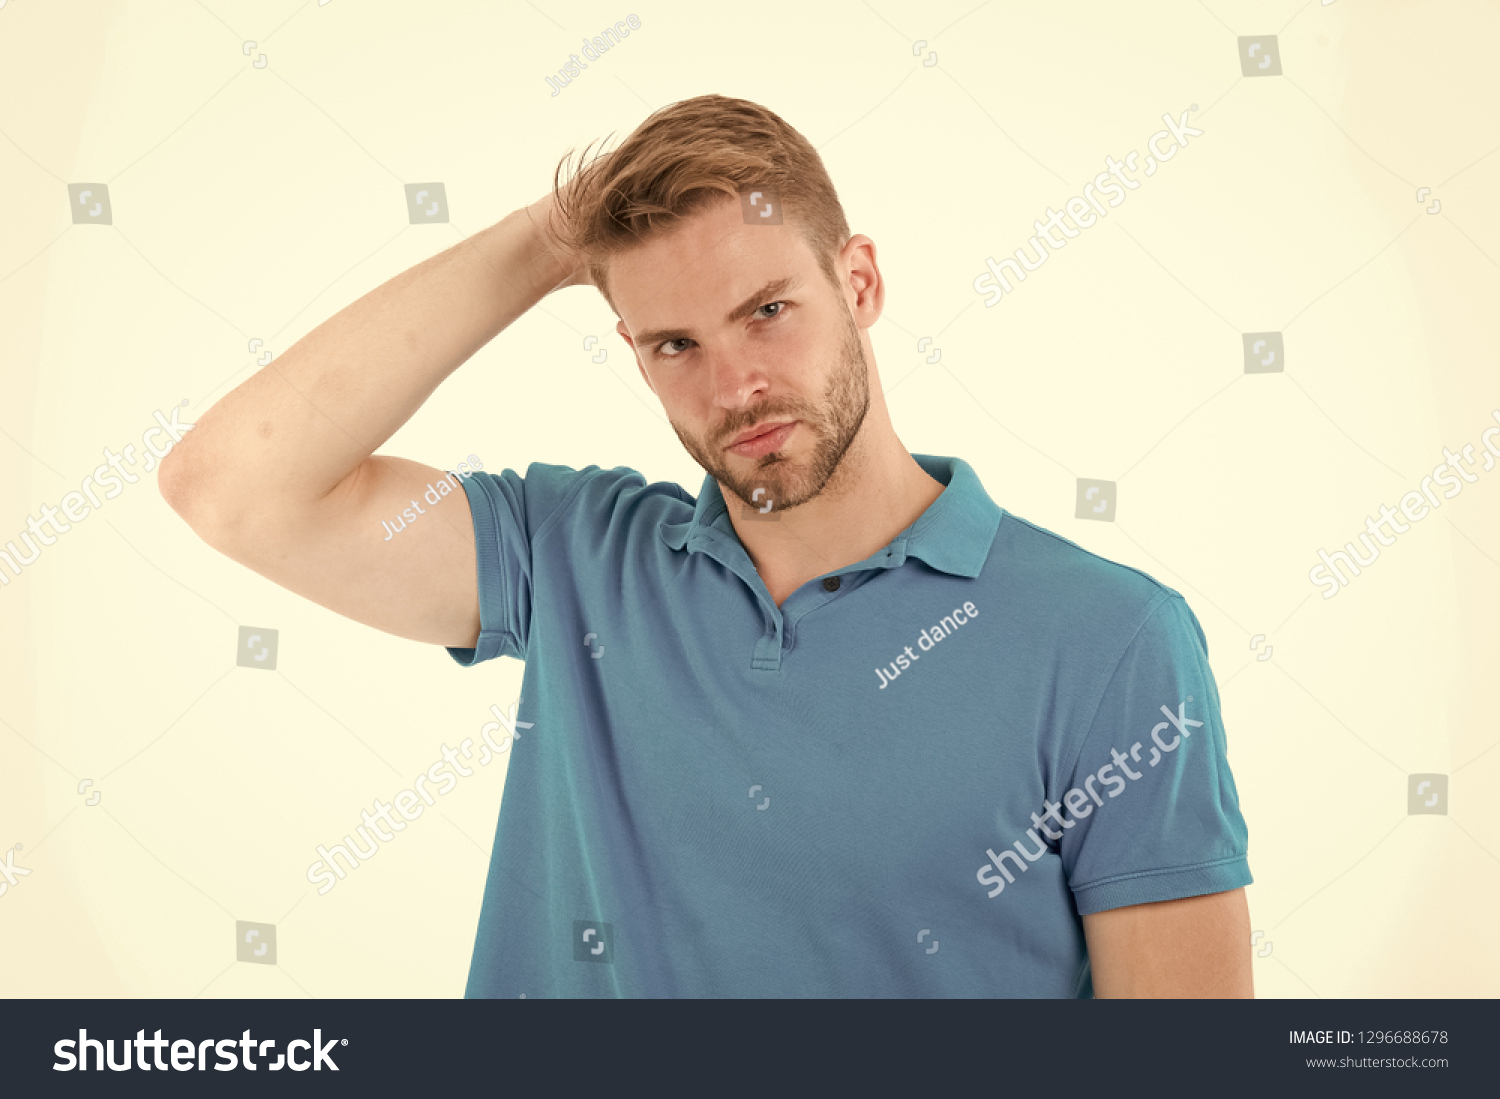 Fashion model touch stylish hair isolated on white background. Man with beard on unshaven face skin. Bearded man in blue tshirt. Skincare and barber salon. Style or trend and hairstyle concept. #1296688678